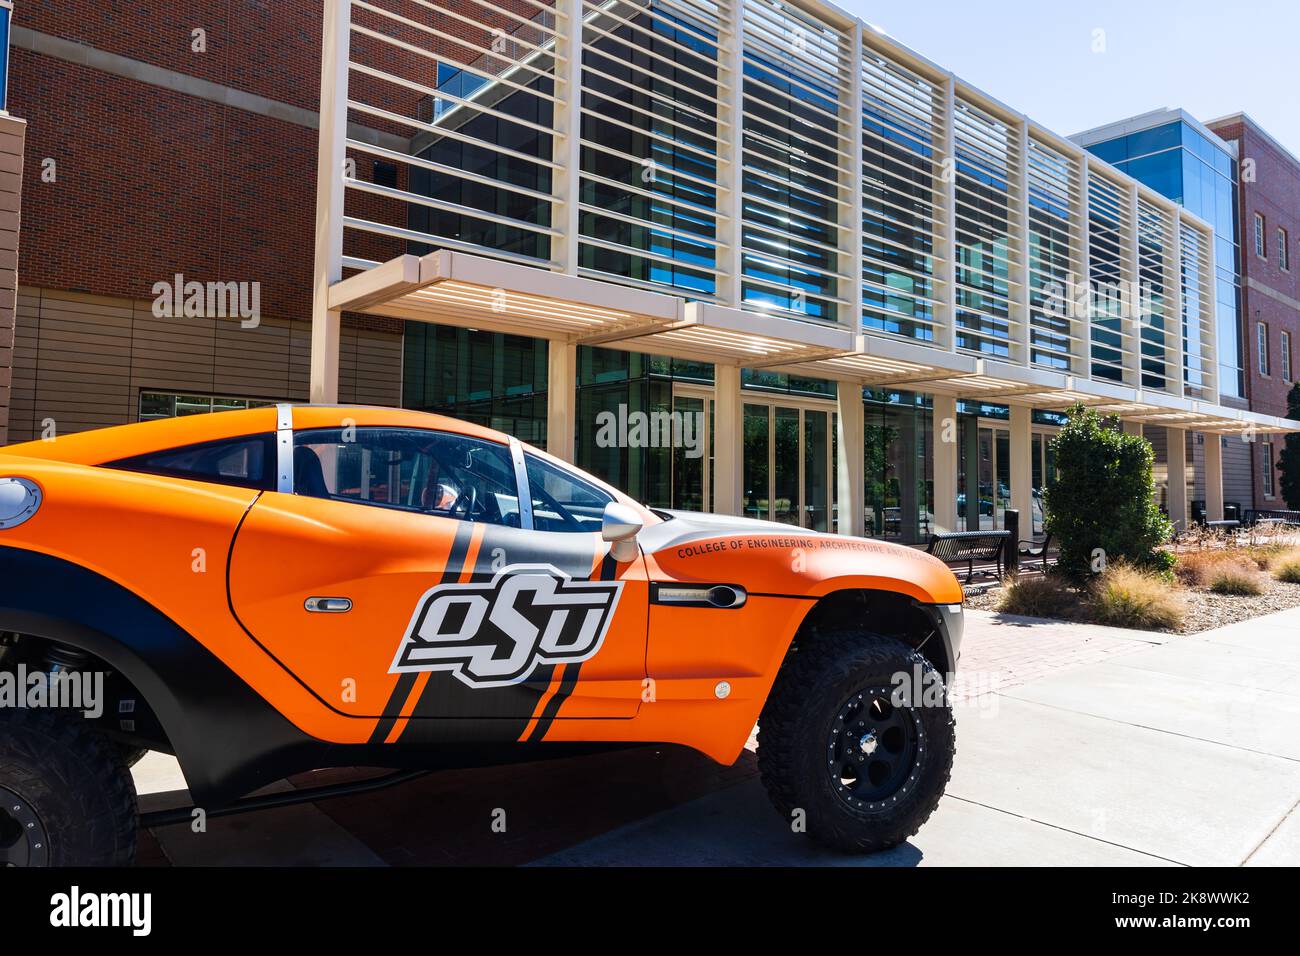 Stillwater, OK - October 21, 2022: Off road vehicle in front of the College of Engineering, Architecture and Technology on the Oklahoma State Universi Stock Photo